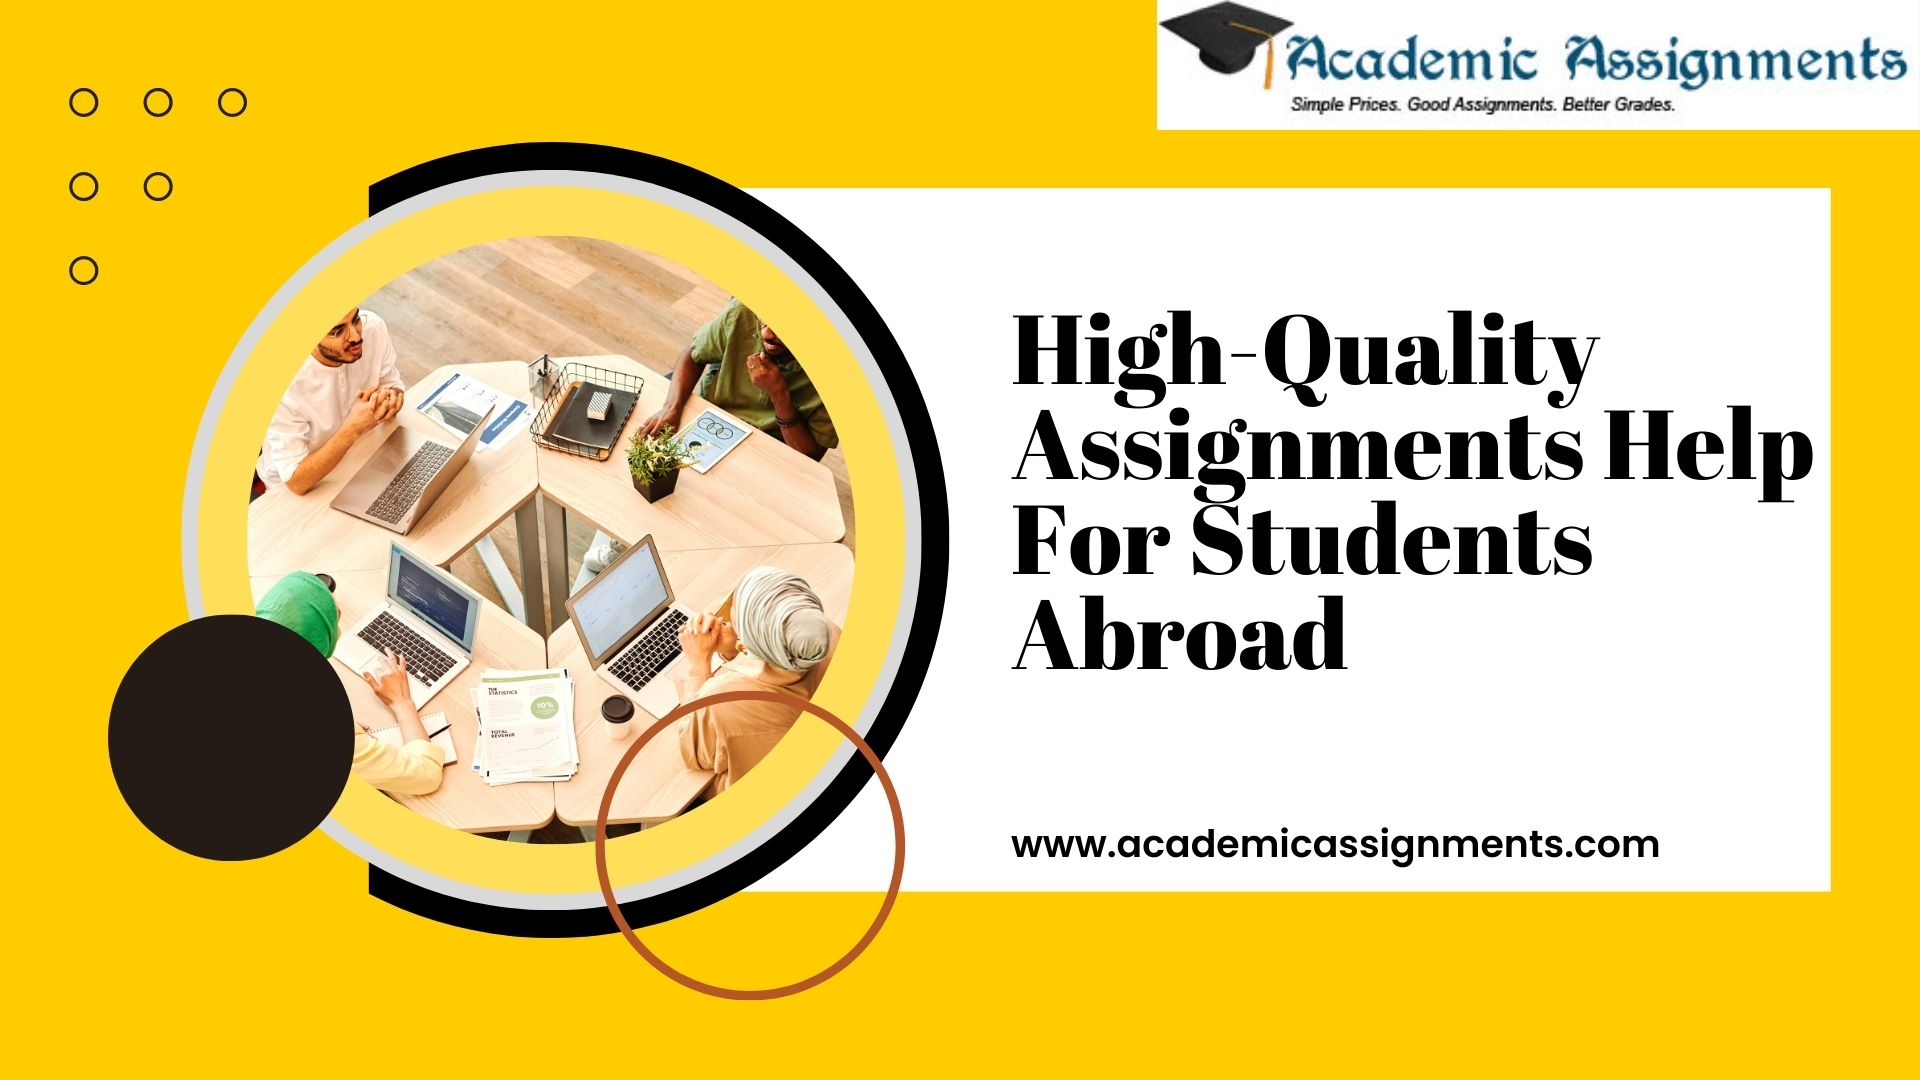 High-Quality Assignments Help For Students Abroad